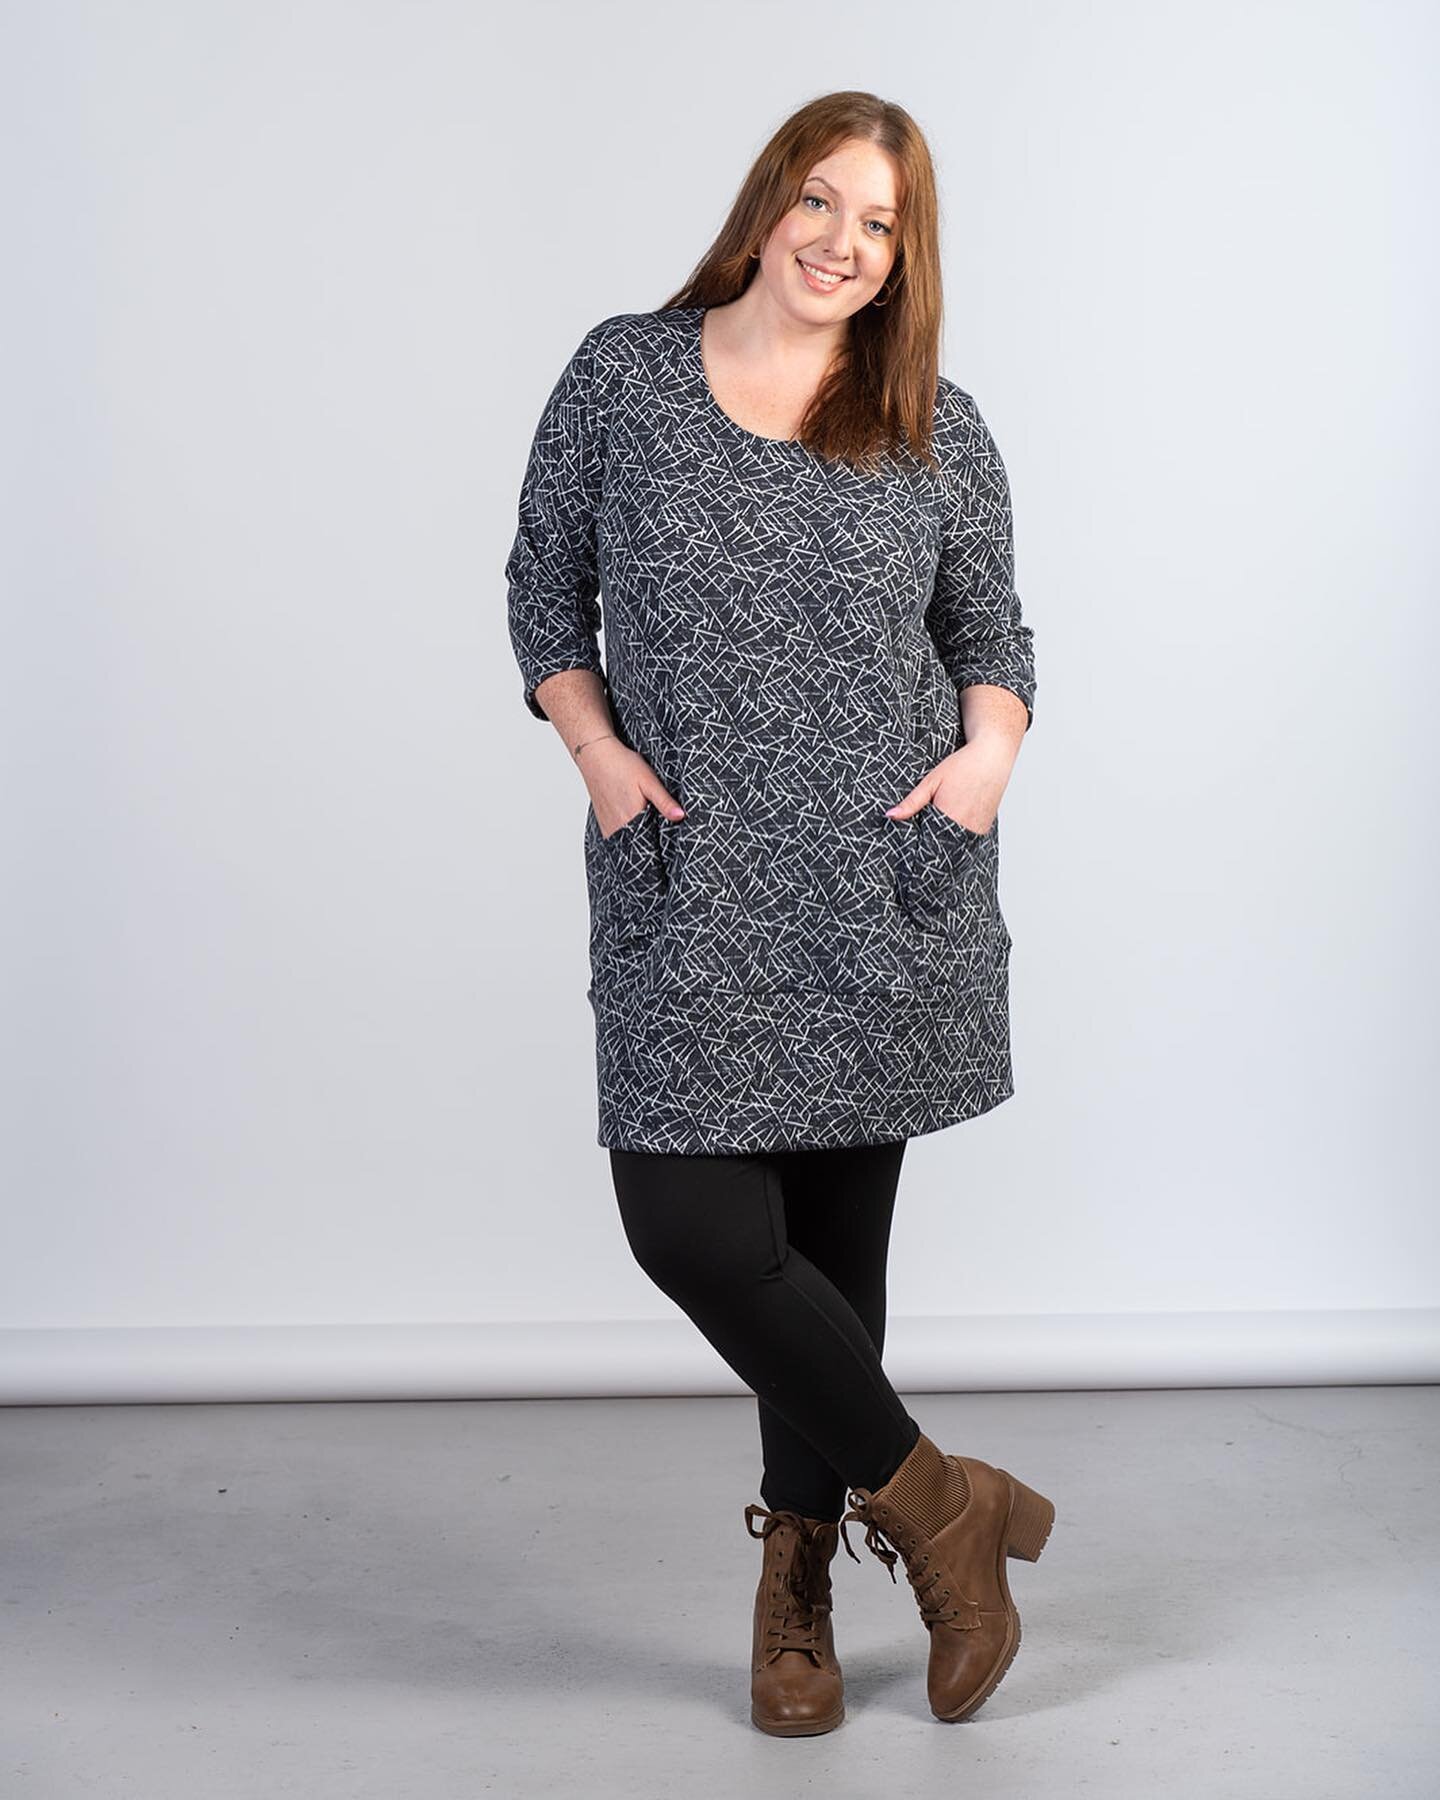 We&rsquo;ll be adding more sizes to 2 older styles near the beginning of Sept. 

Decided to re-photograph them with our model @xo_fionafoley 

#falldress #tunic #ottawa #ottawafahion #navytunic #ottawafashiondesigner #ottawaclothing #handmadetunic #h